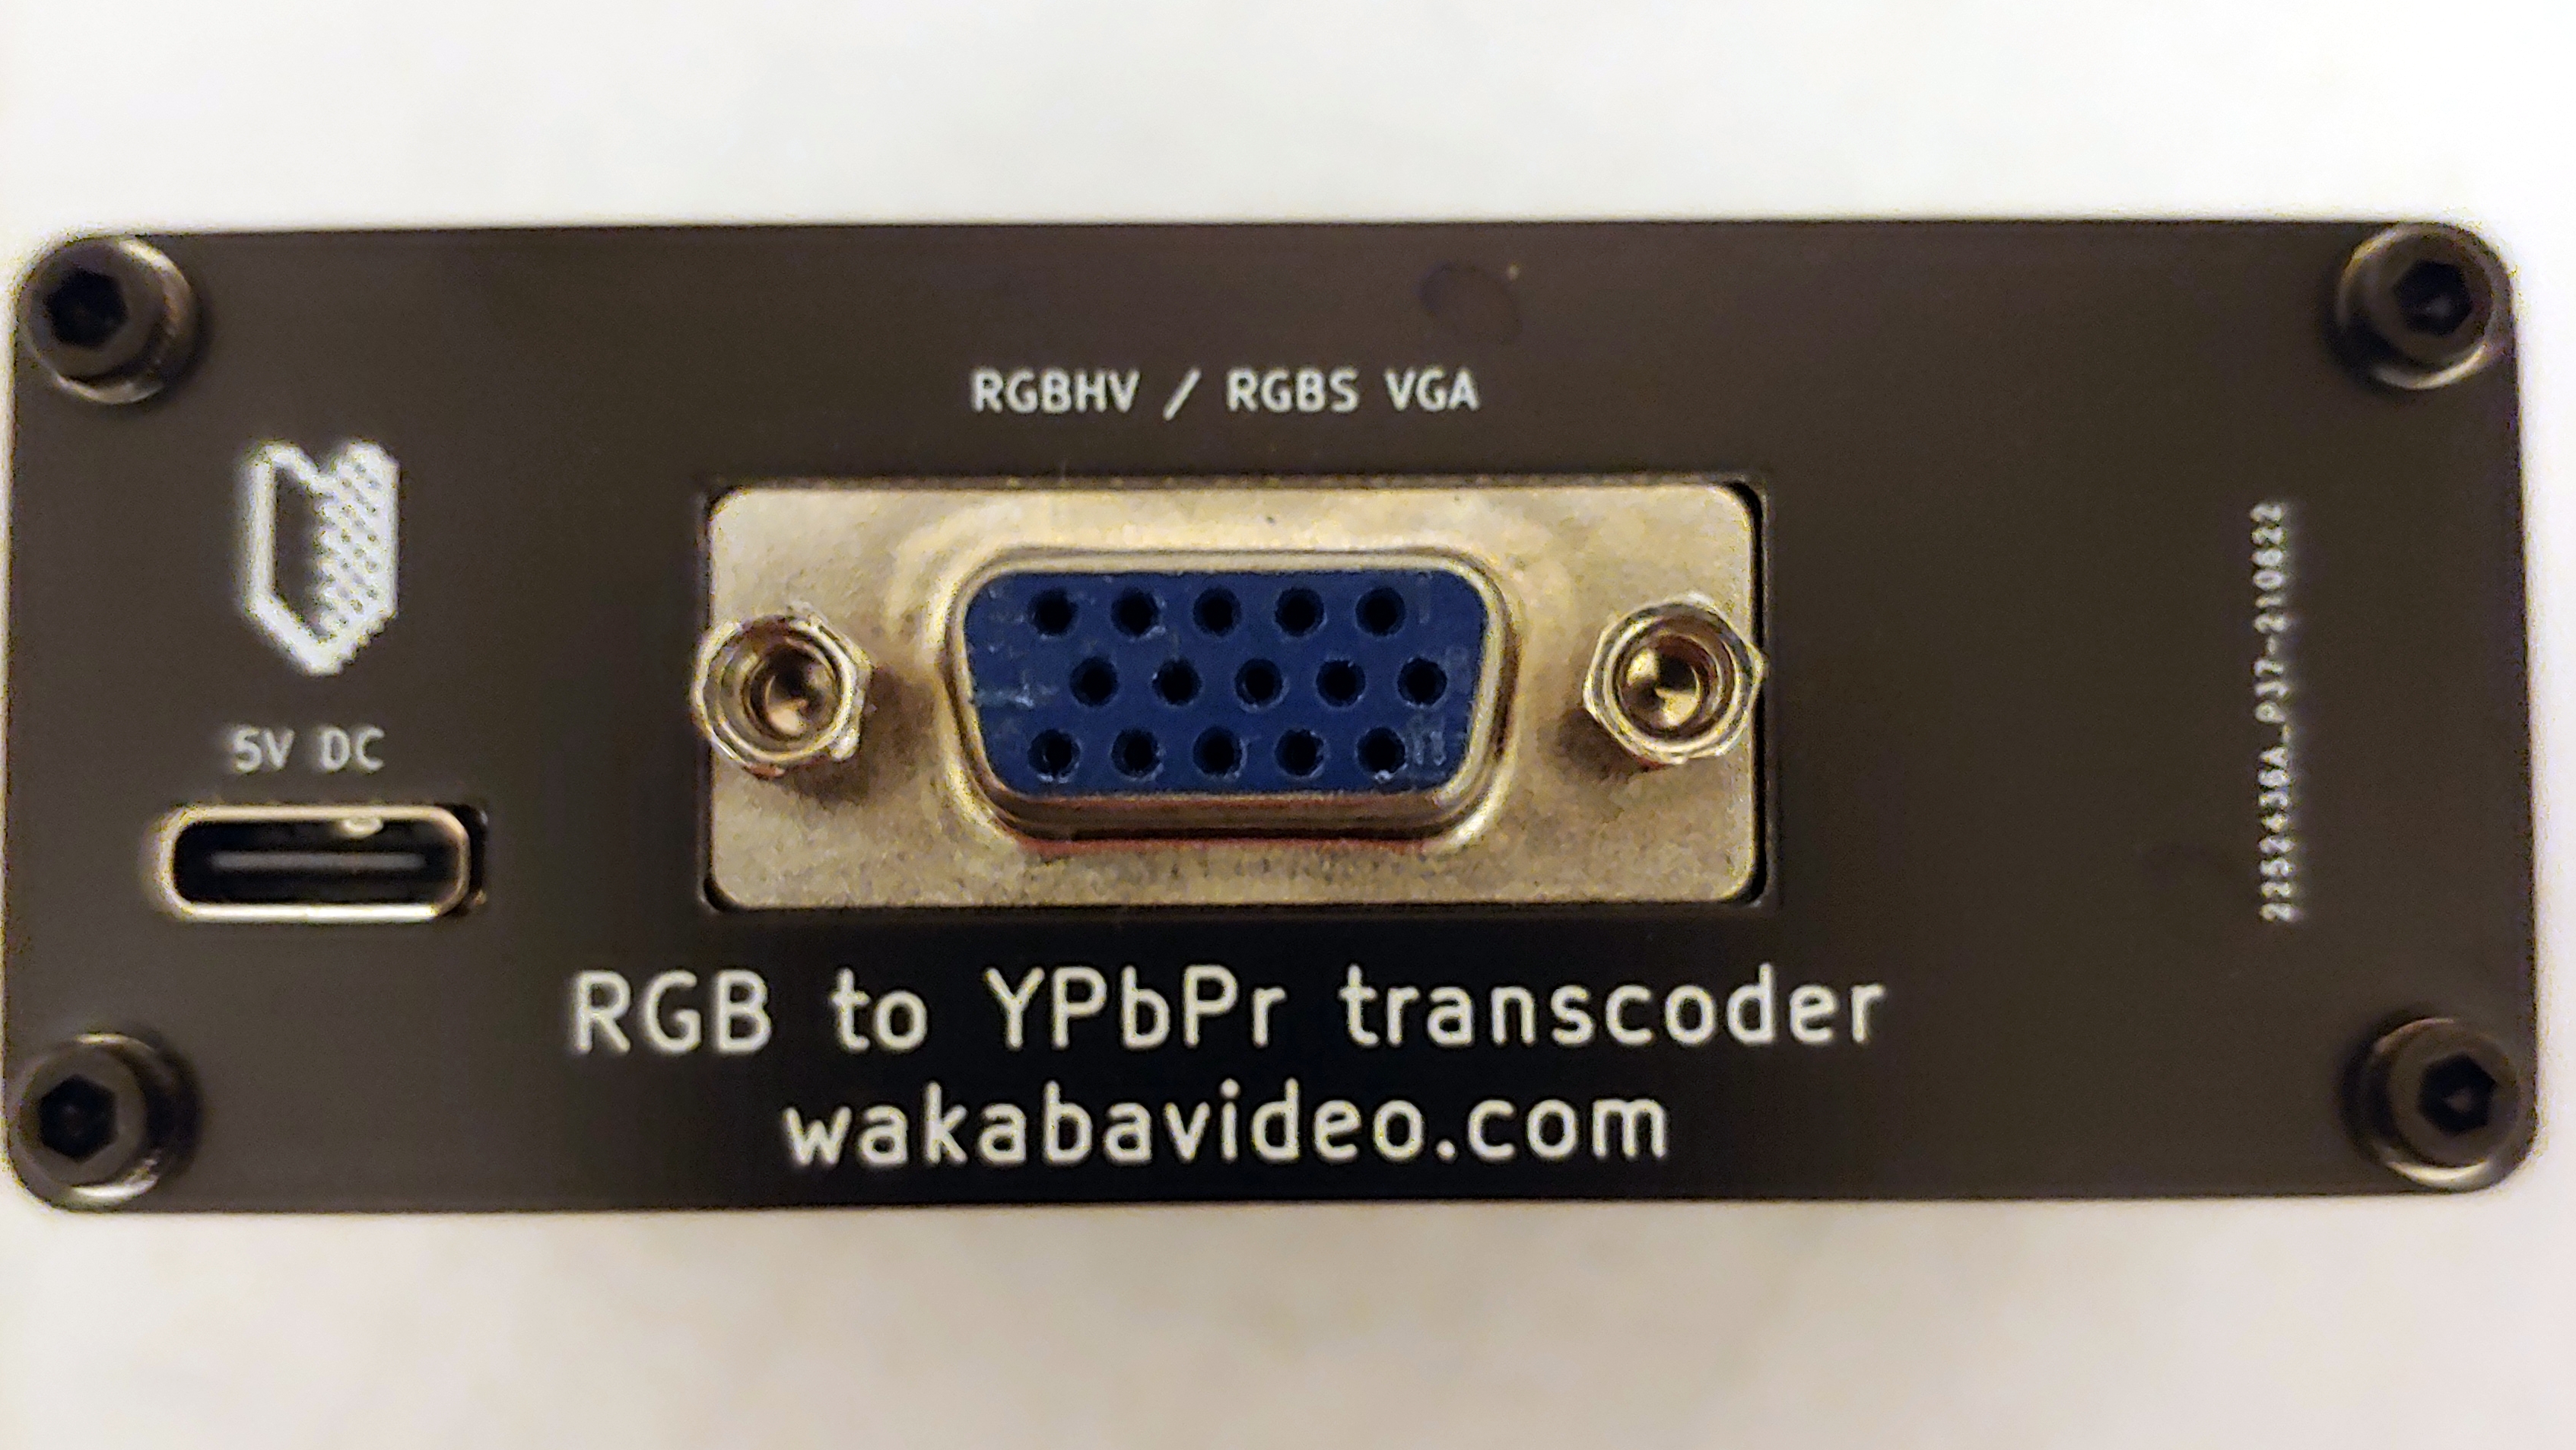 Front with USB (type c) 5v input and rgbhv or rgbs through VGA.